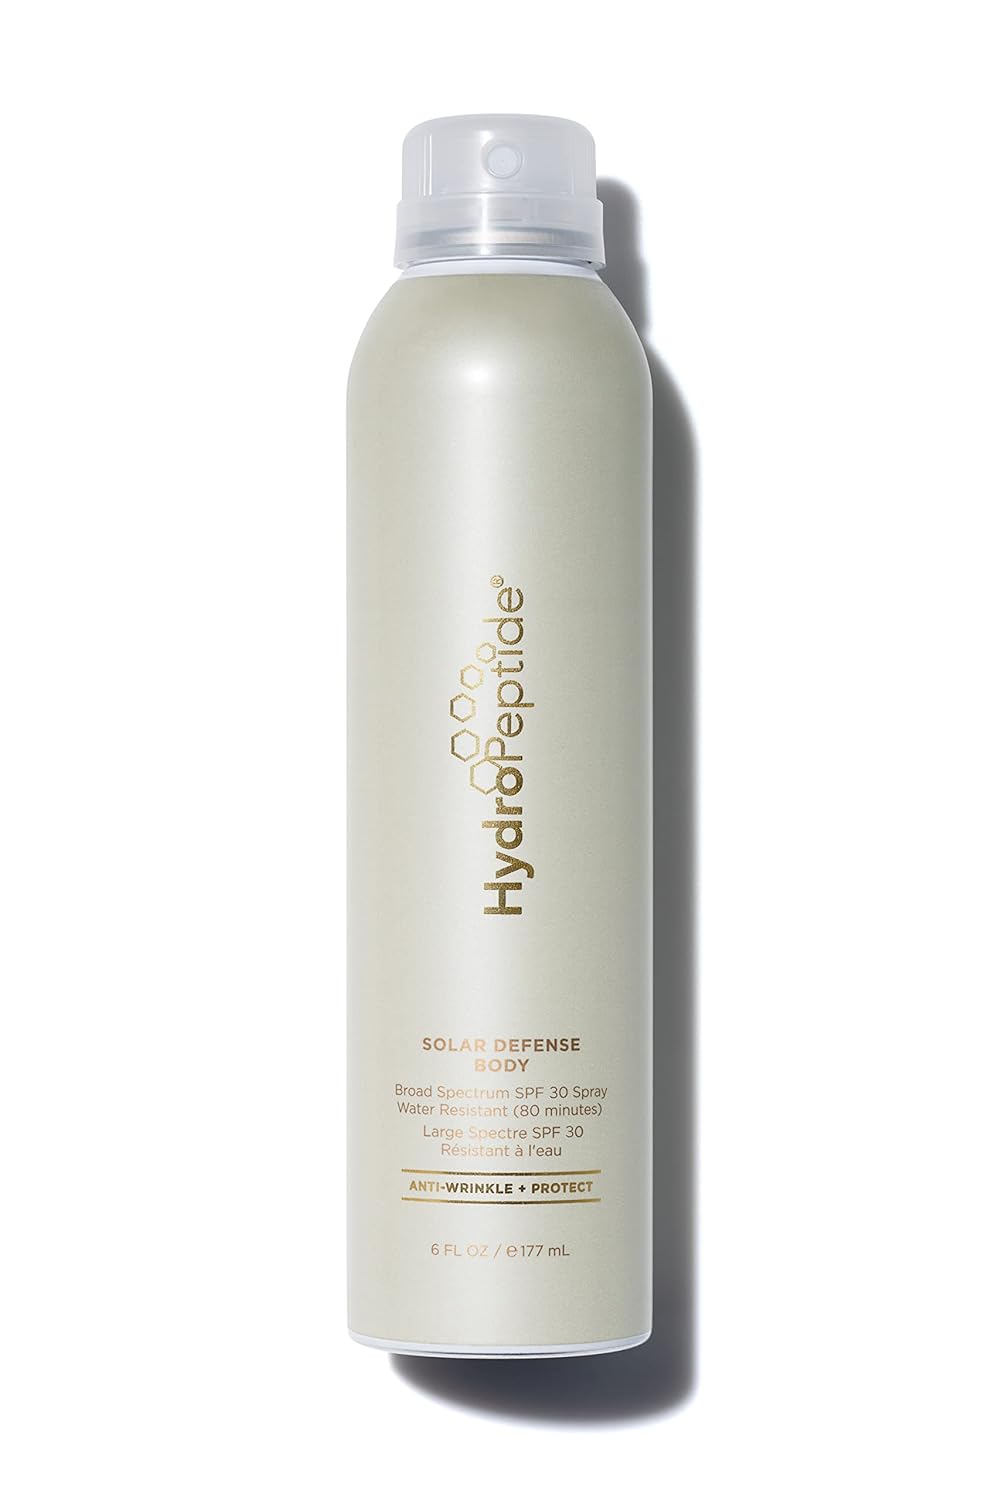 HydroPeptide Solar Defense Body SPF 30, Broad Spectrum, Water Resistant Sunscreen, Hydrates and Soothes, 6